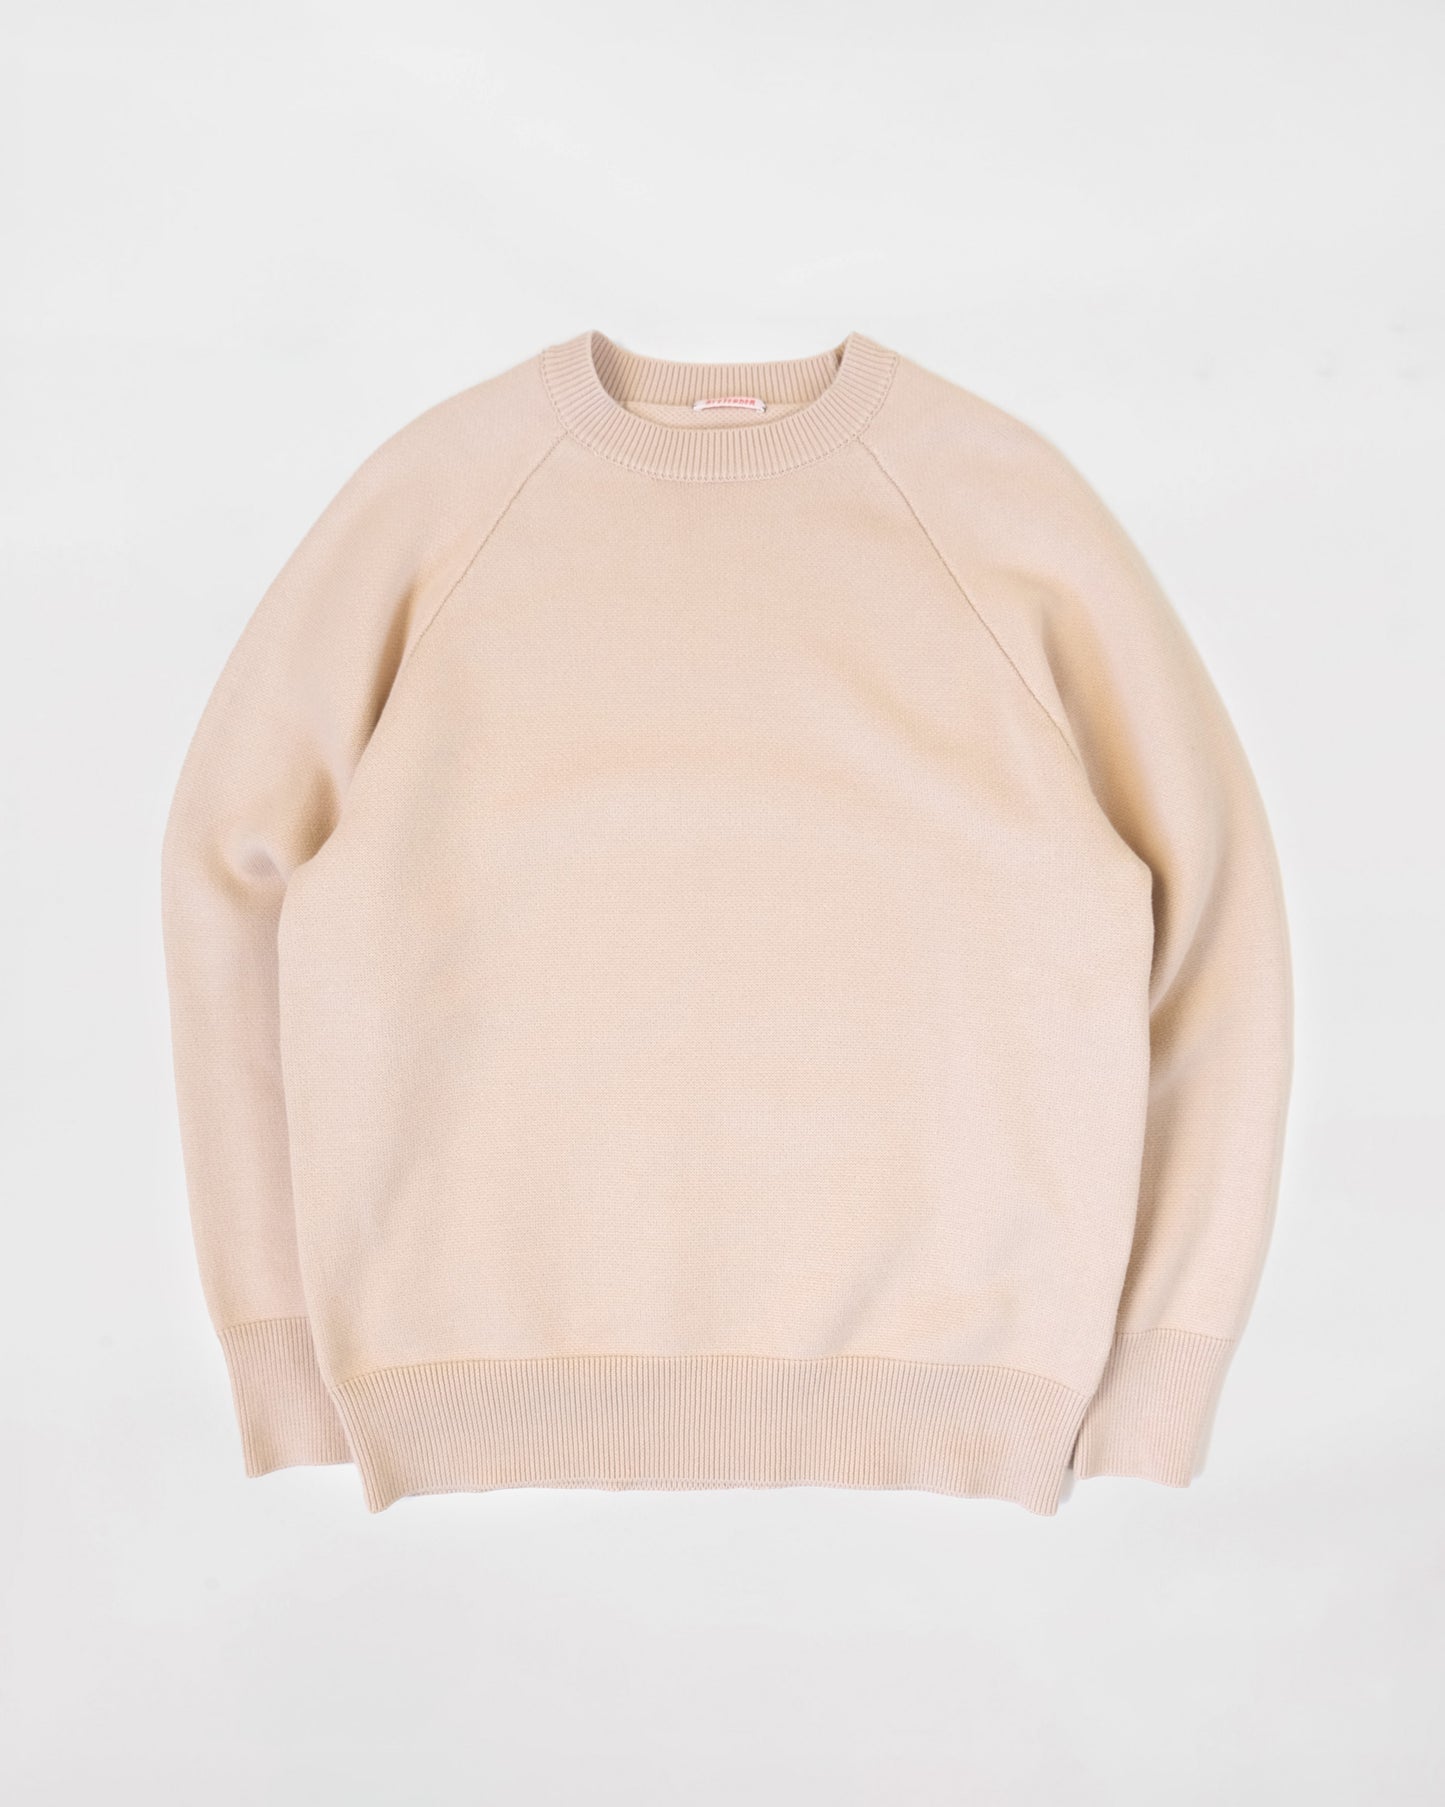 404 Paled Color Crew Neck Sweater by RYE TENDER - Beige